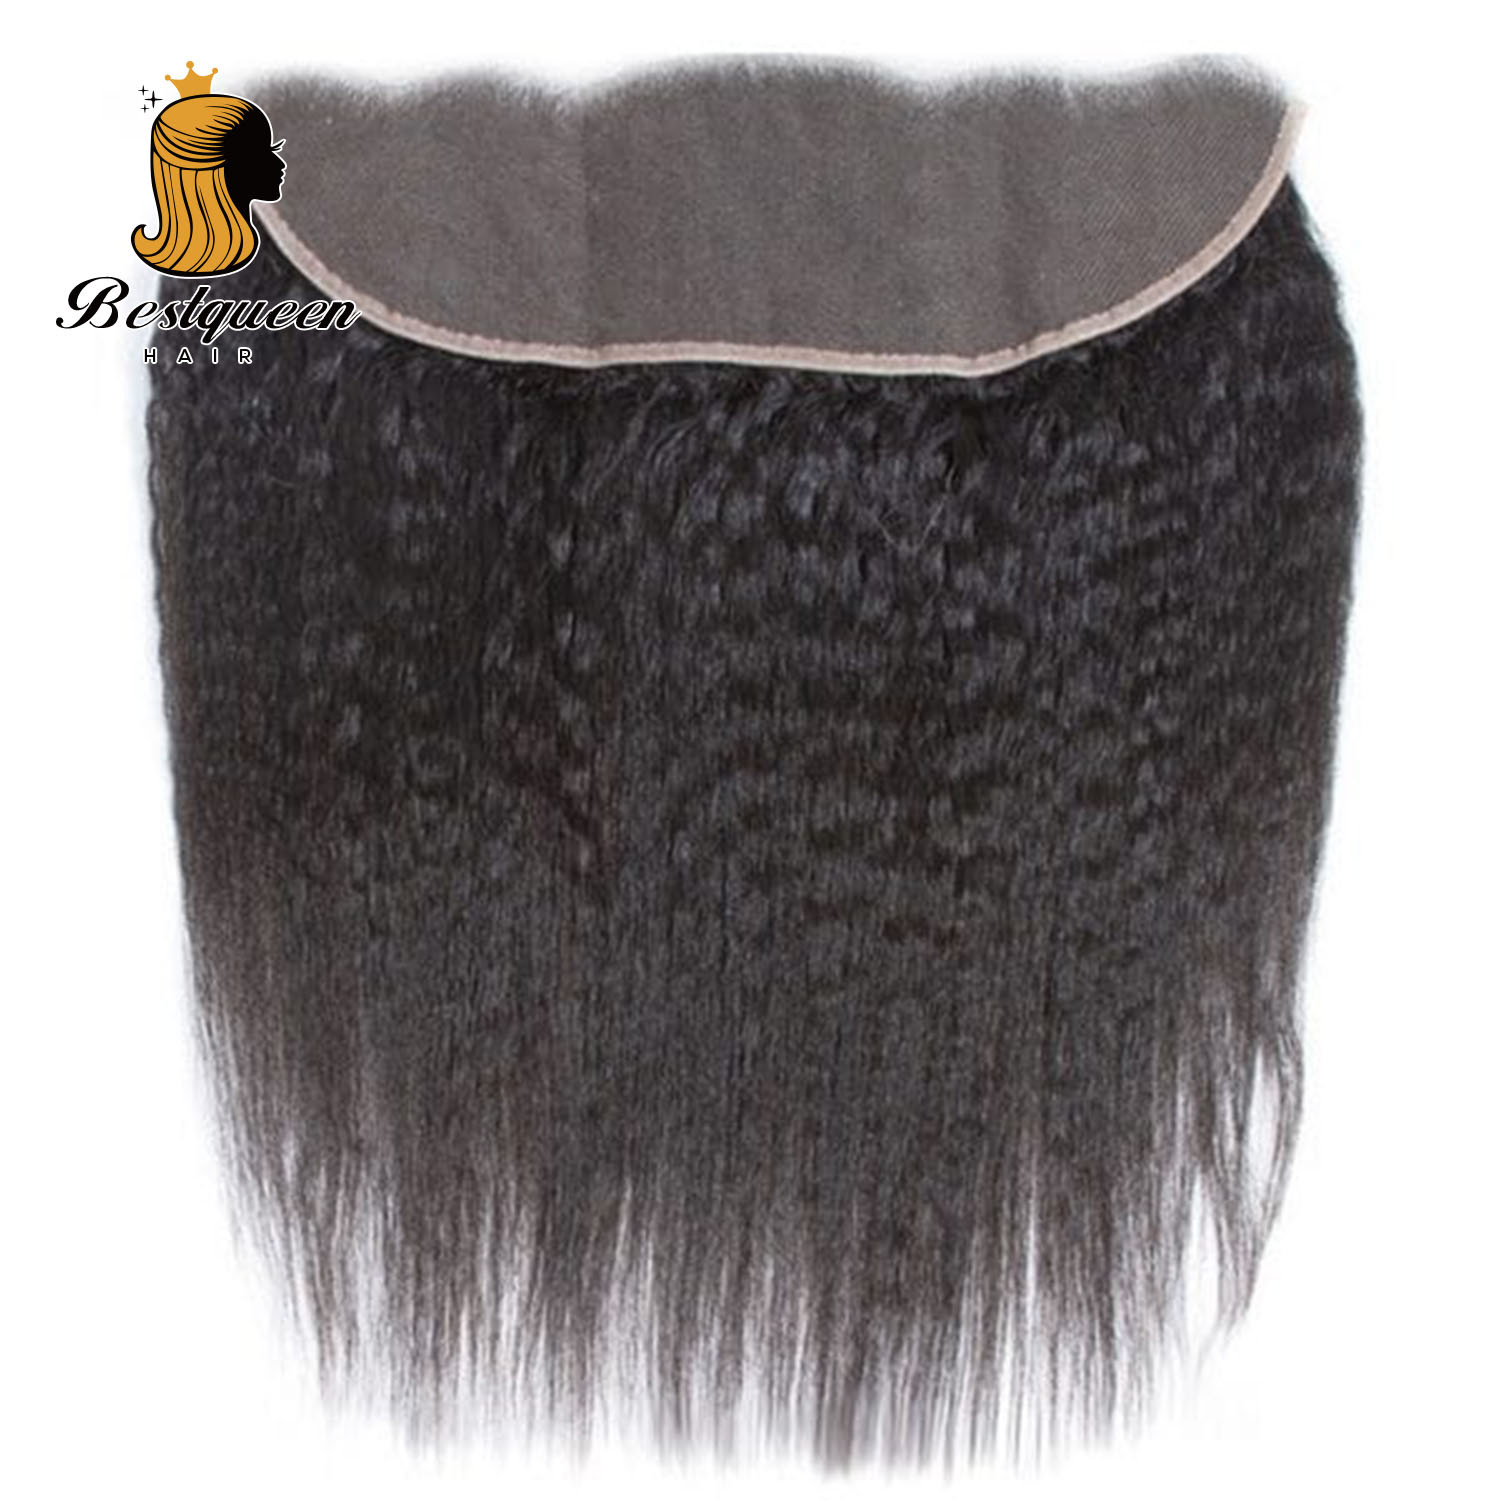 BestqueenHair Kinky Straight Lace Closure 13*4 Illusion Lace Frontal Kinky Straight ,Invisible Lace Raw Unprocessed Hd Closure Frontal  